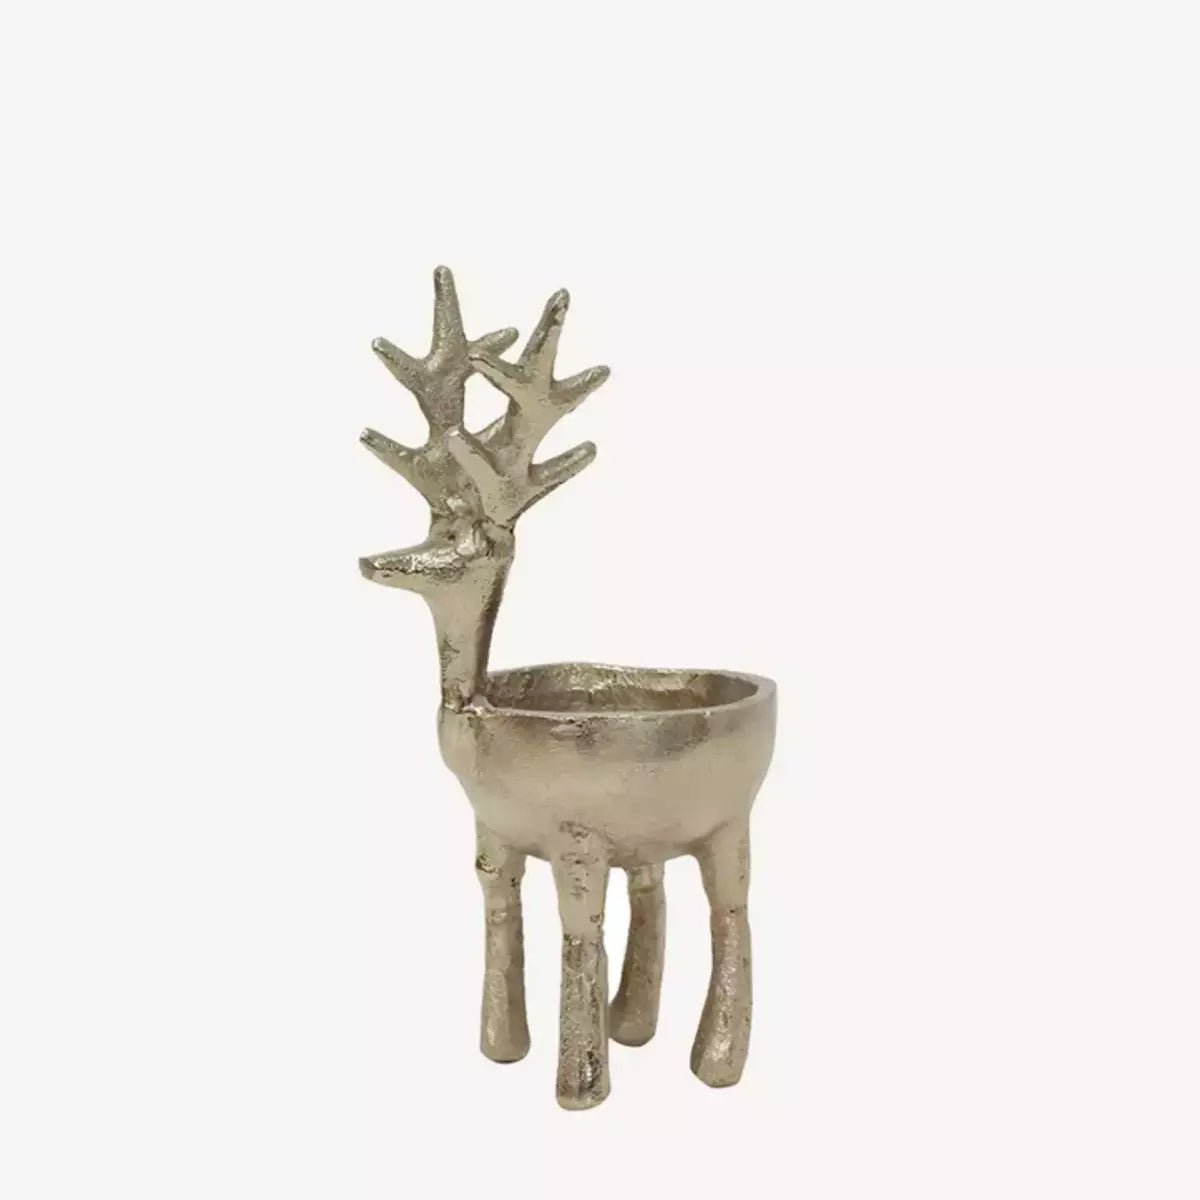 A silver Reindeer Sweets Bowl figurine on a white background, perfect for a festive Christmas table or as part of a French Country Collections Reindeer Sweets Bowl display.